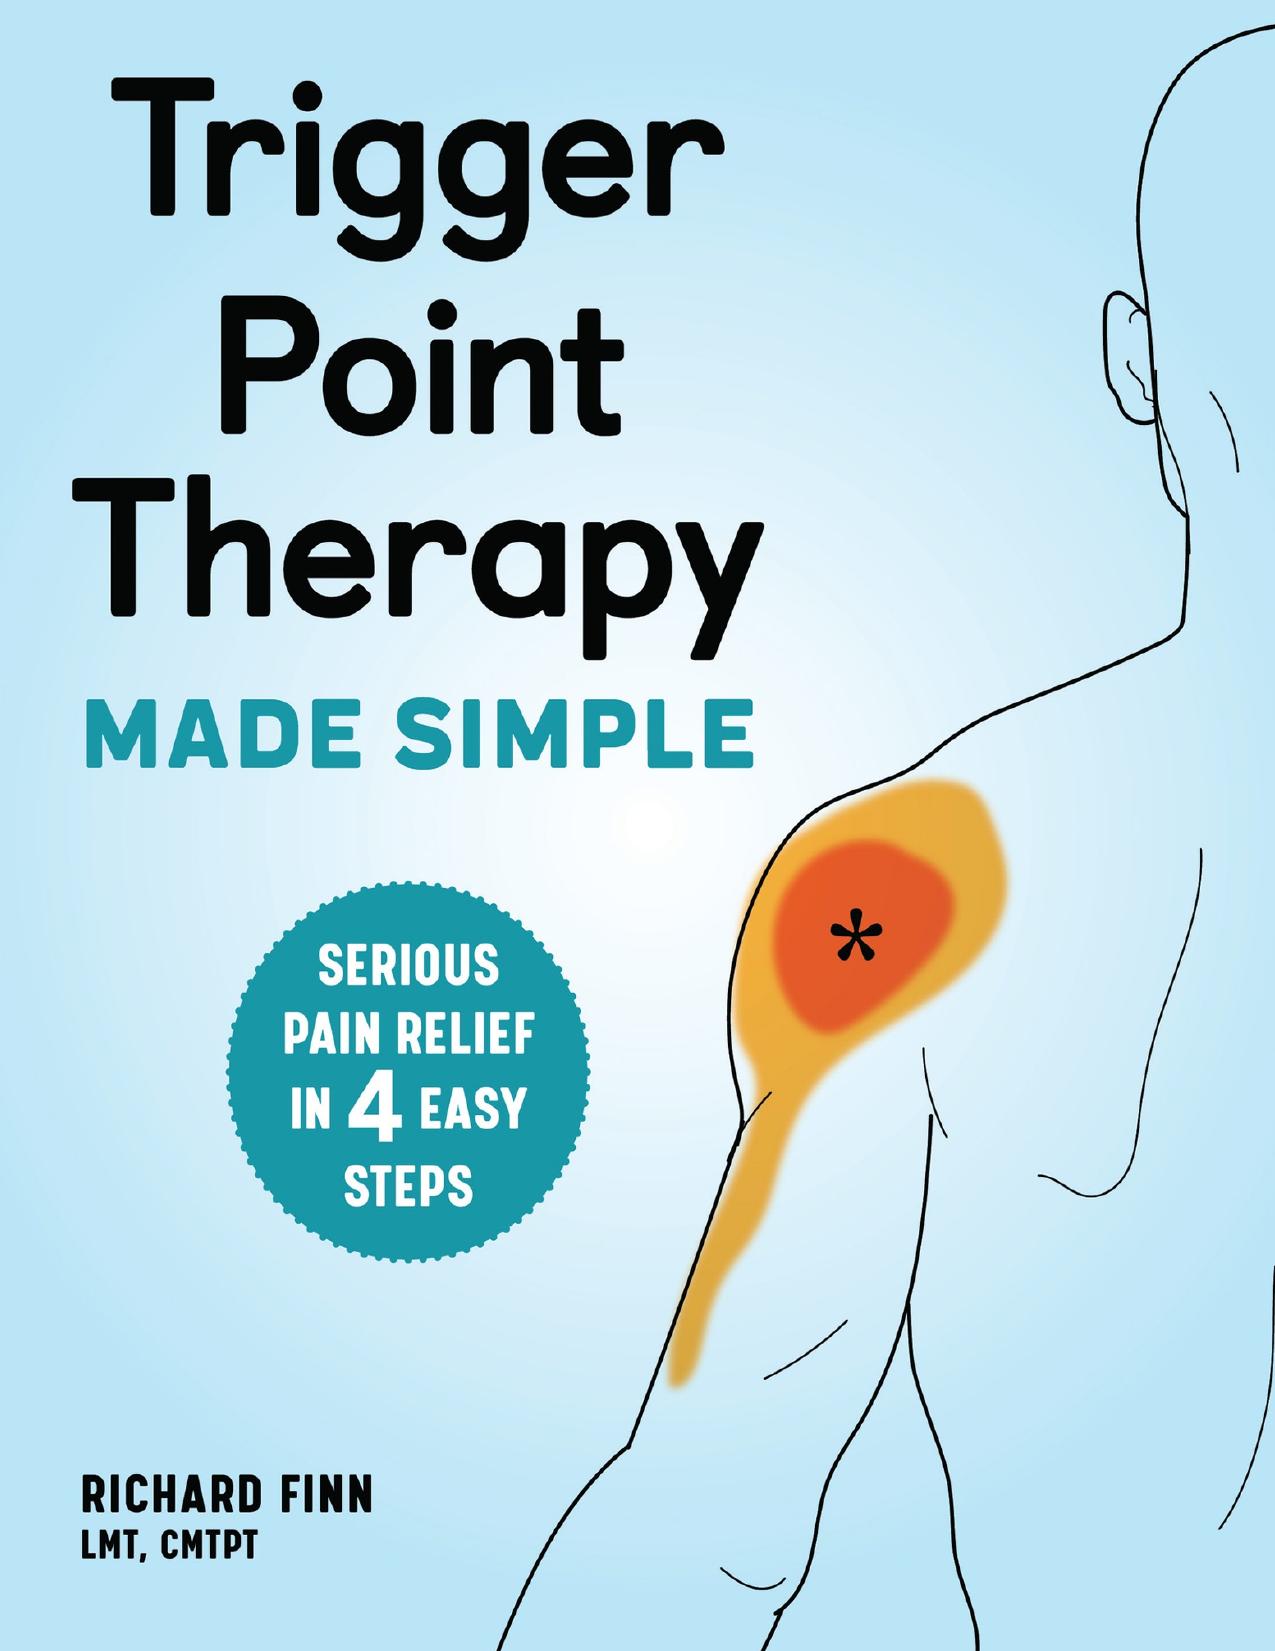 Trigger Point Therapy Made Simple: Serious Pain Relief in 4 Easy Steps by Finn LMT CMTPT Richard